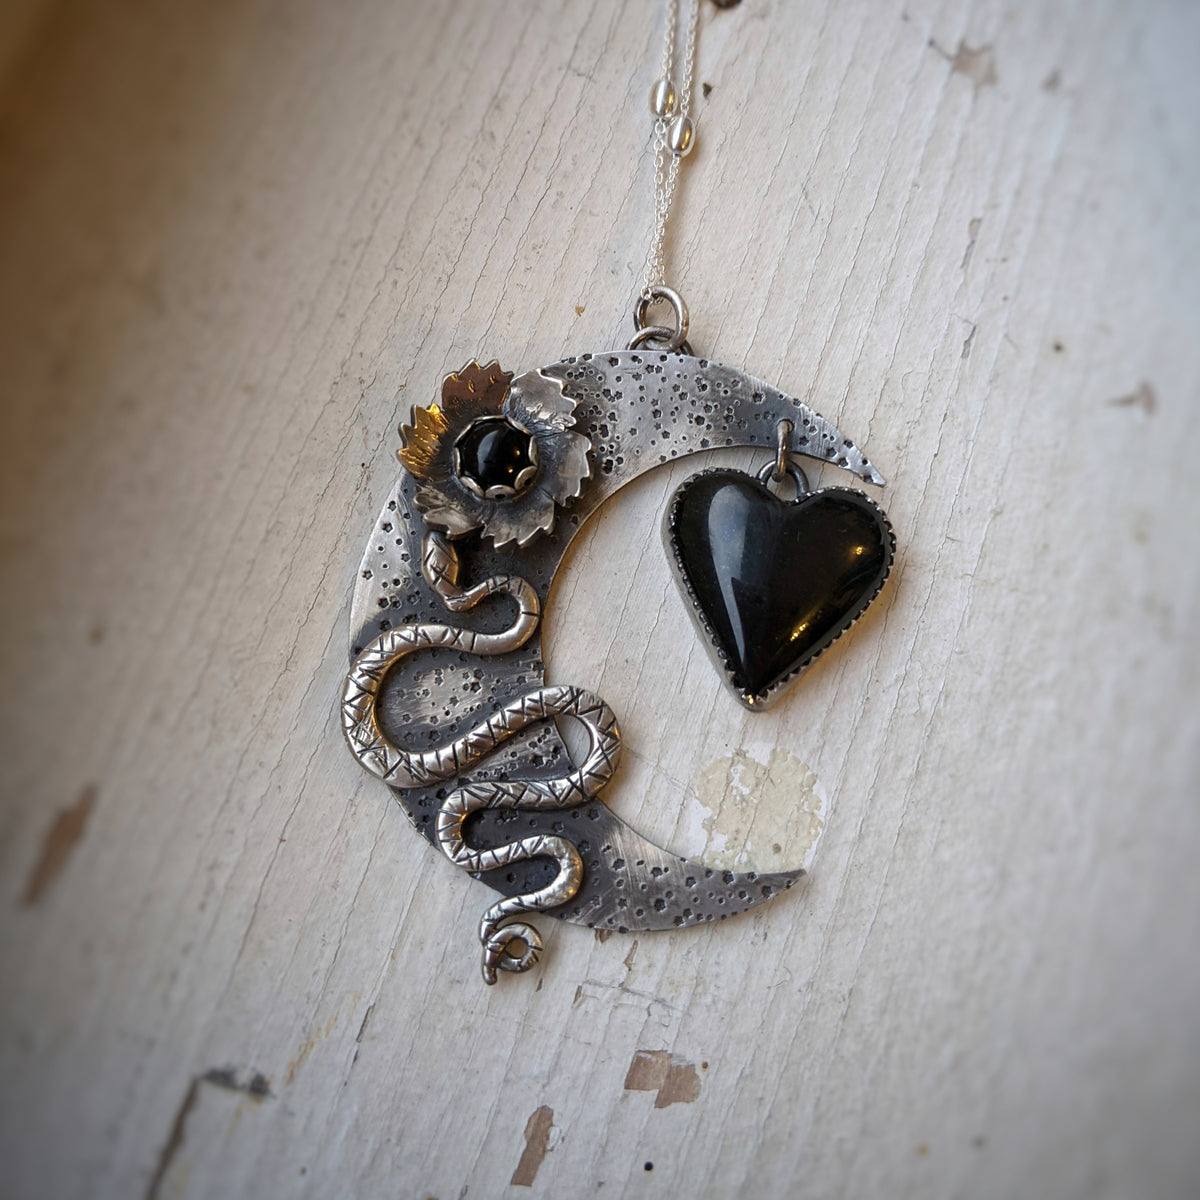 Divine Feminine Necklace with Crescent Moon and Serpent